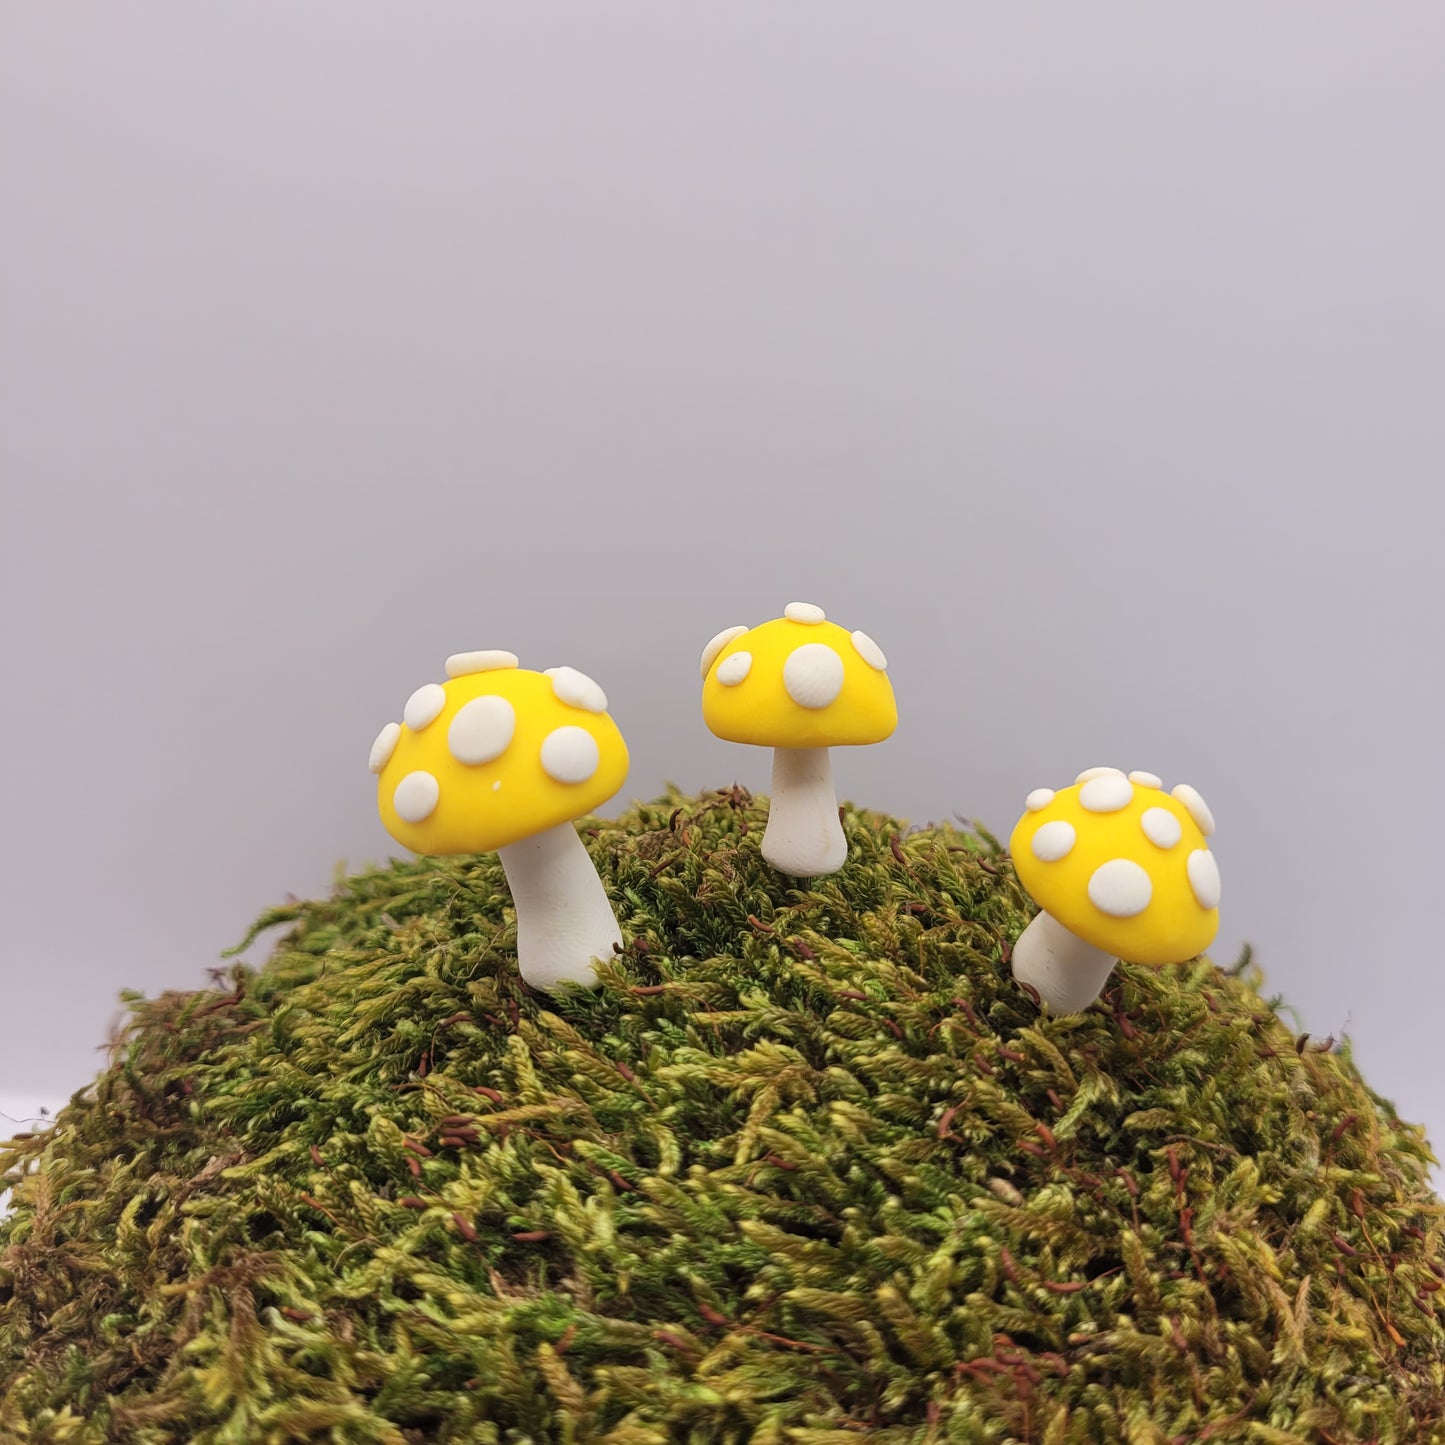 Three small yellow mushrooms with textured tops stand on a preserved moss hill.